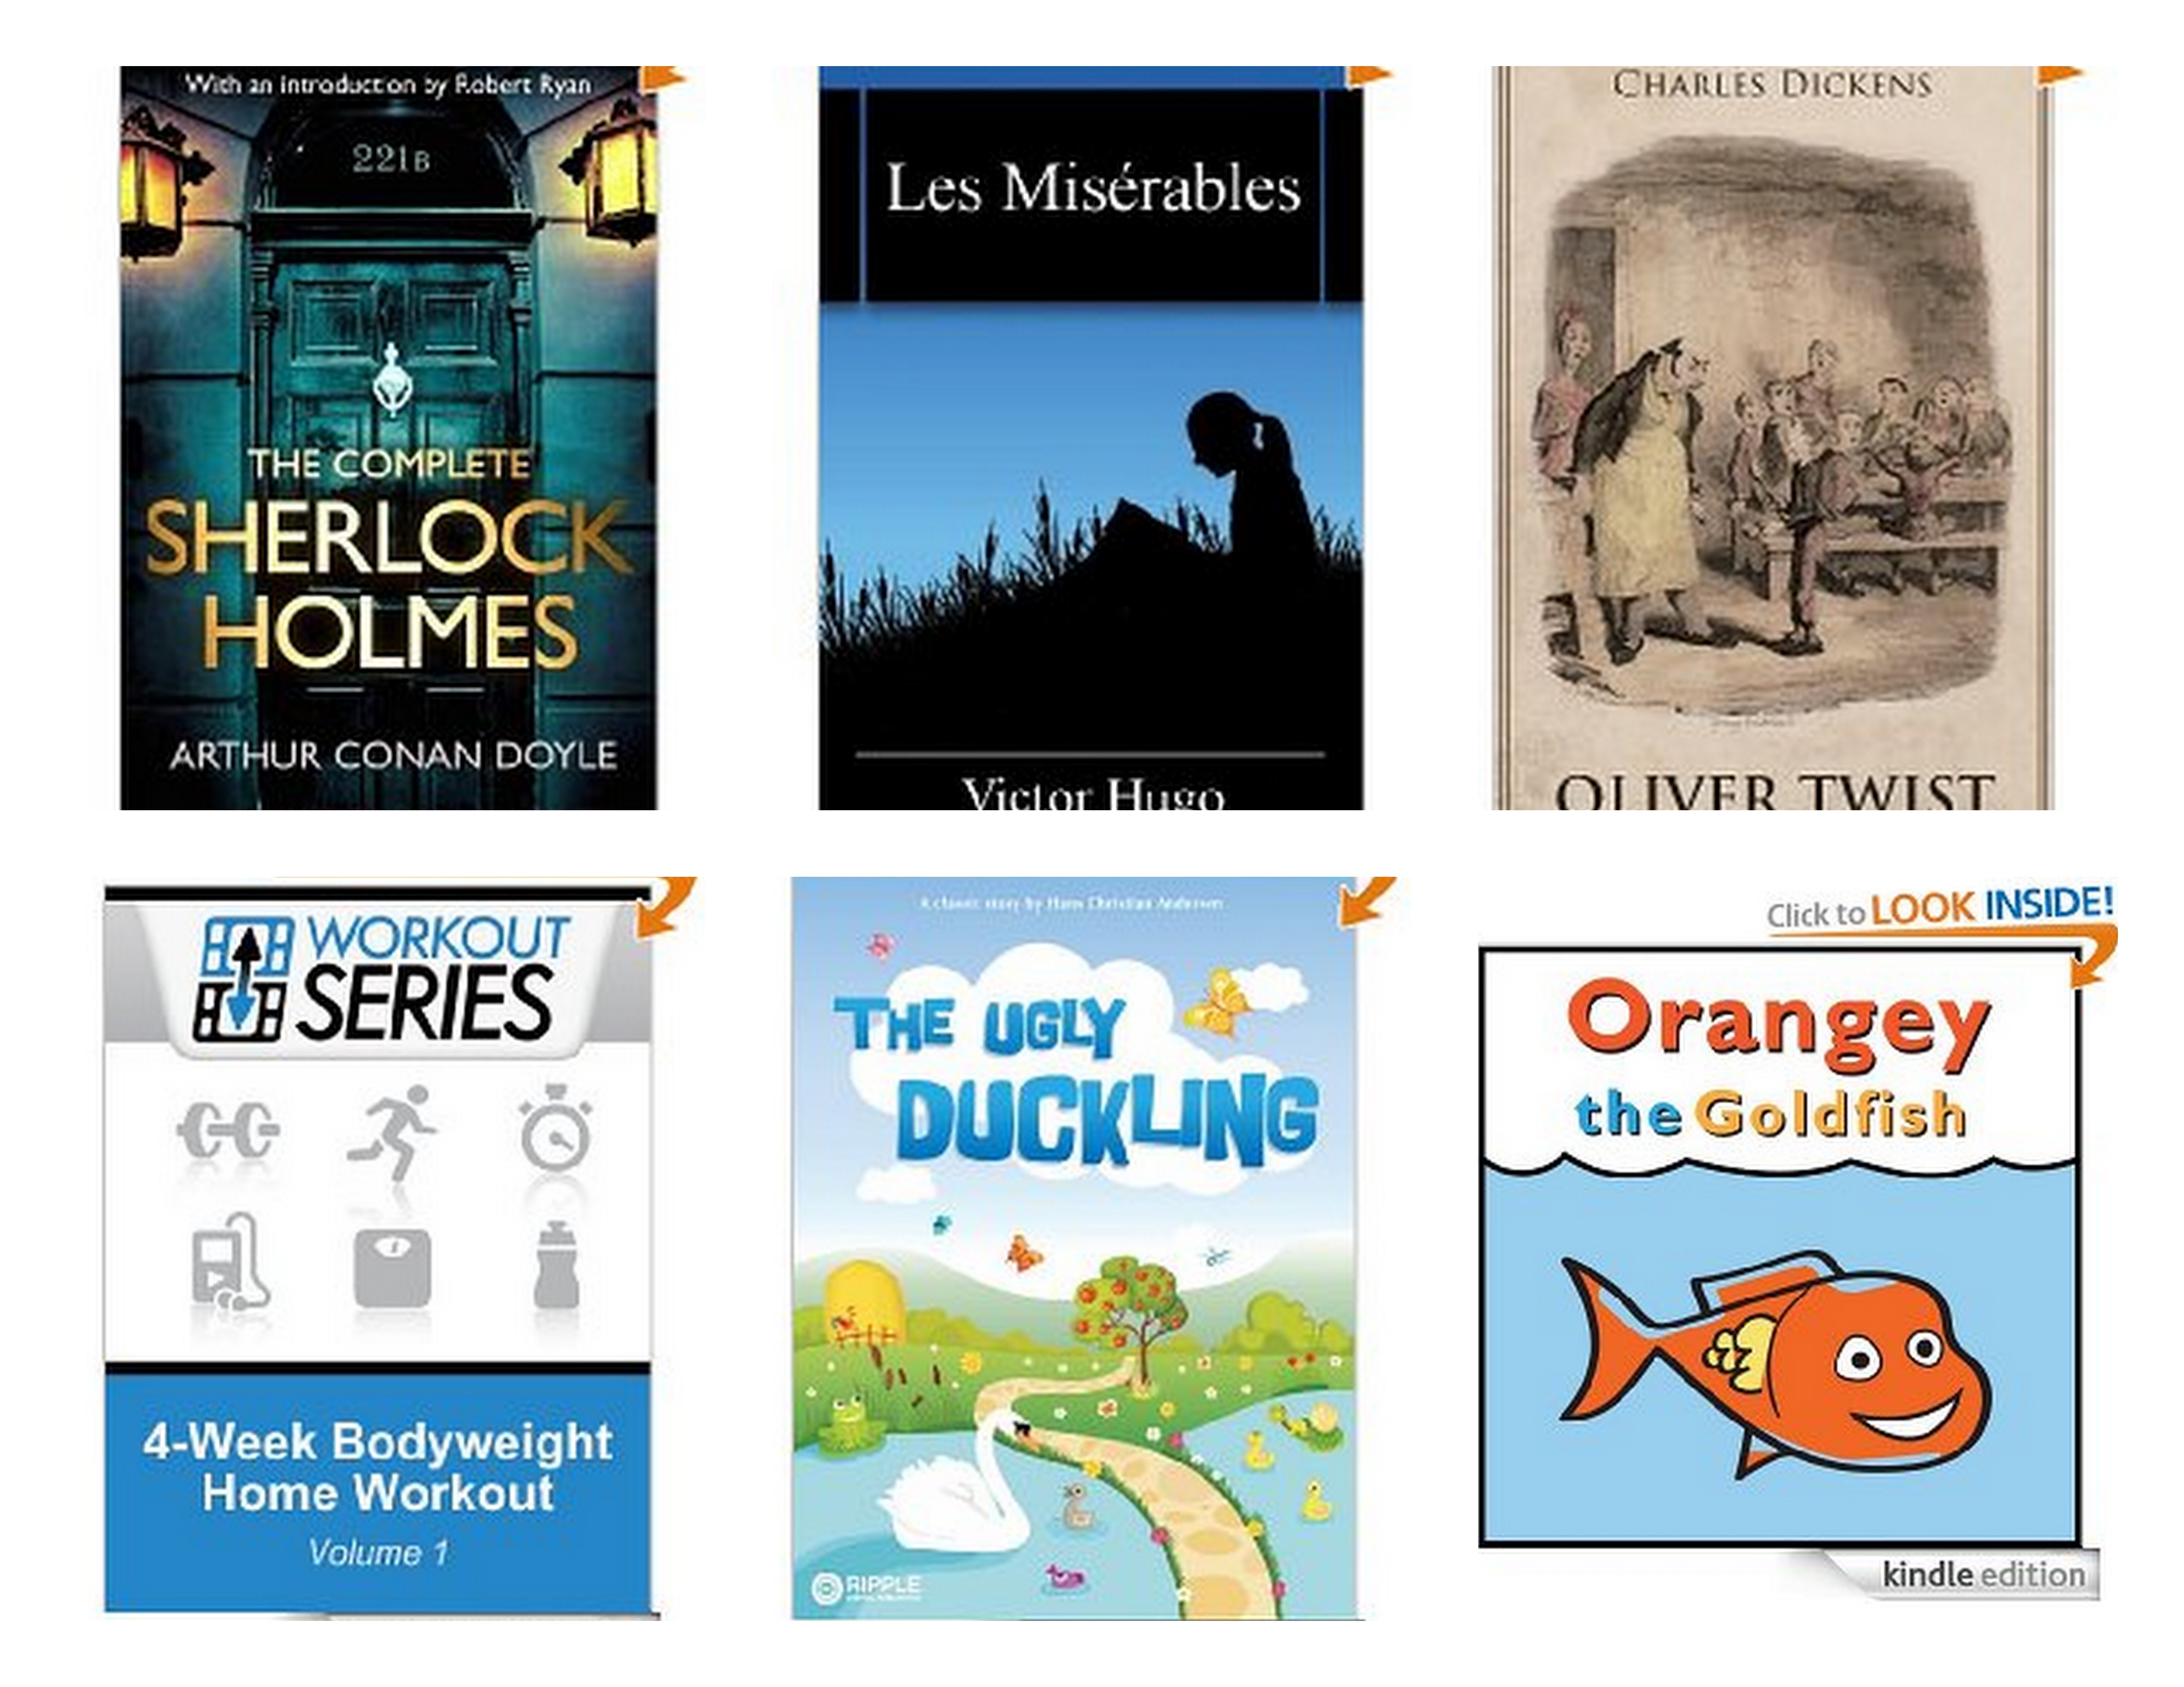 Free Kindle Books | Sherlock Holmes, Les Miserables, 4 Week Bodyweight Home Workout and More